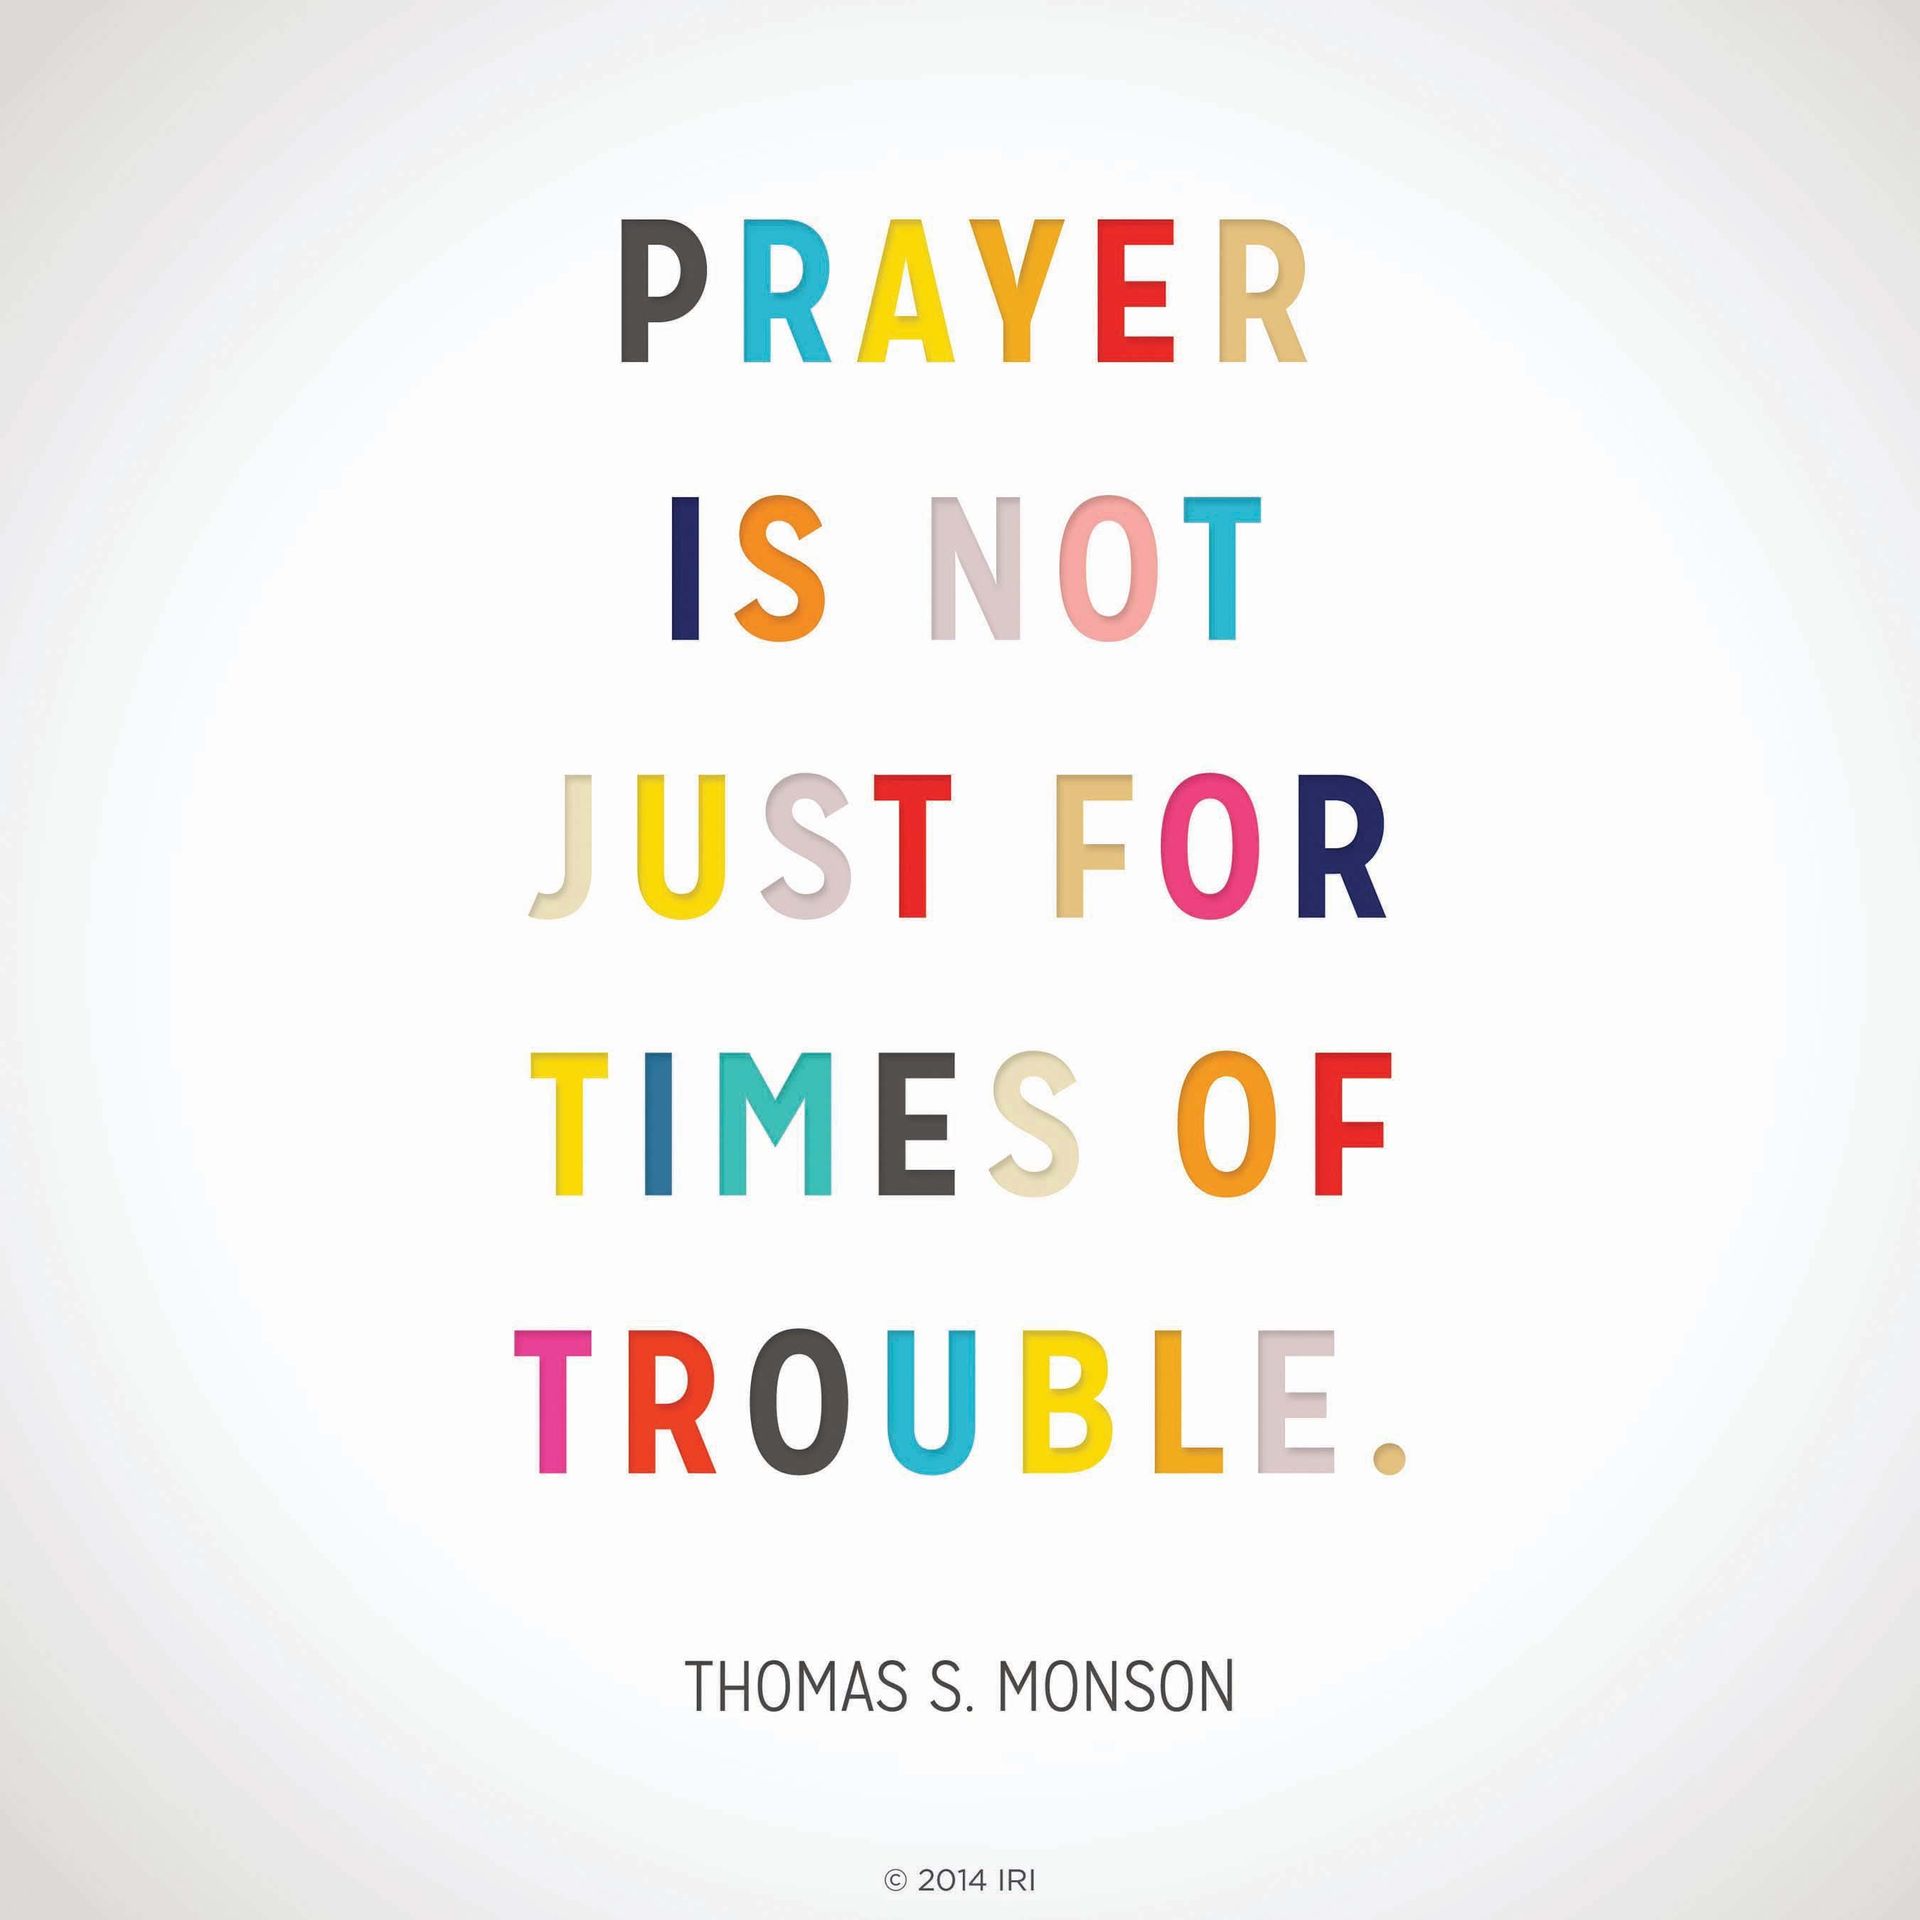 “Prayer is not just for times of trouble.”—President Thomas S. Monson, “We Never Walk Alone”